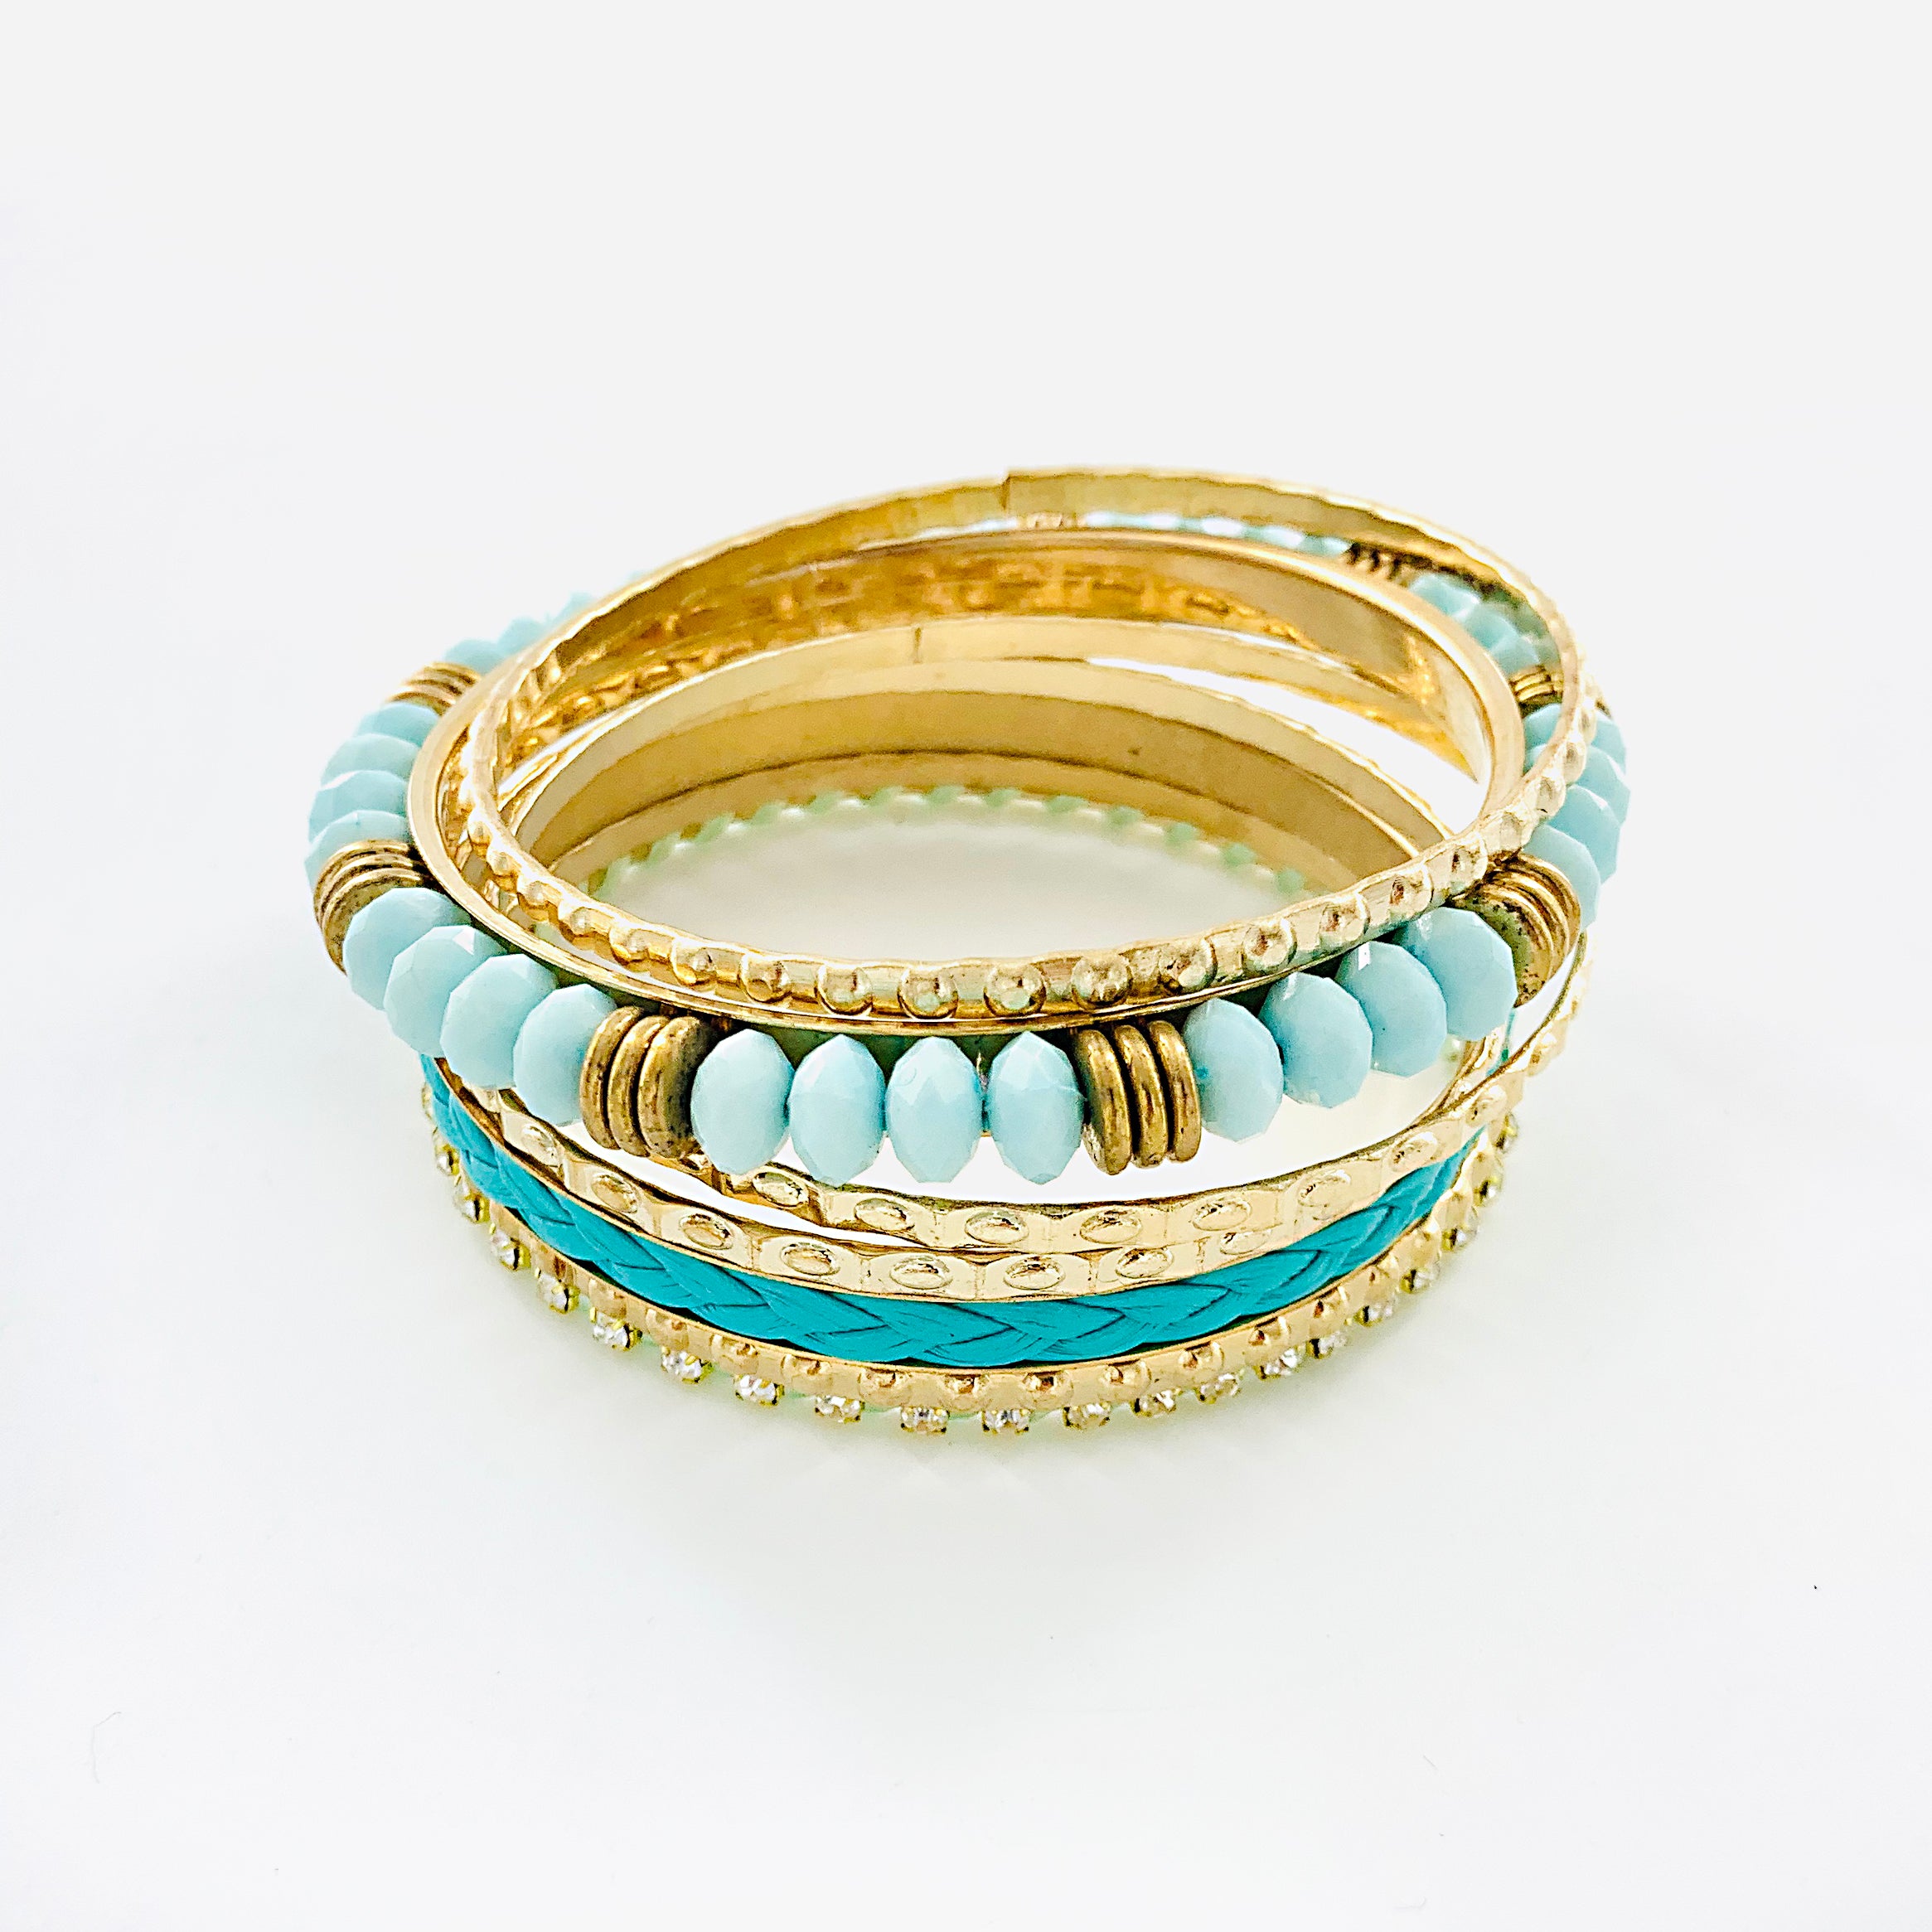 Gold Bangles with Turquoise beads and Diamante stones